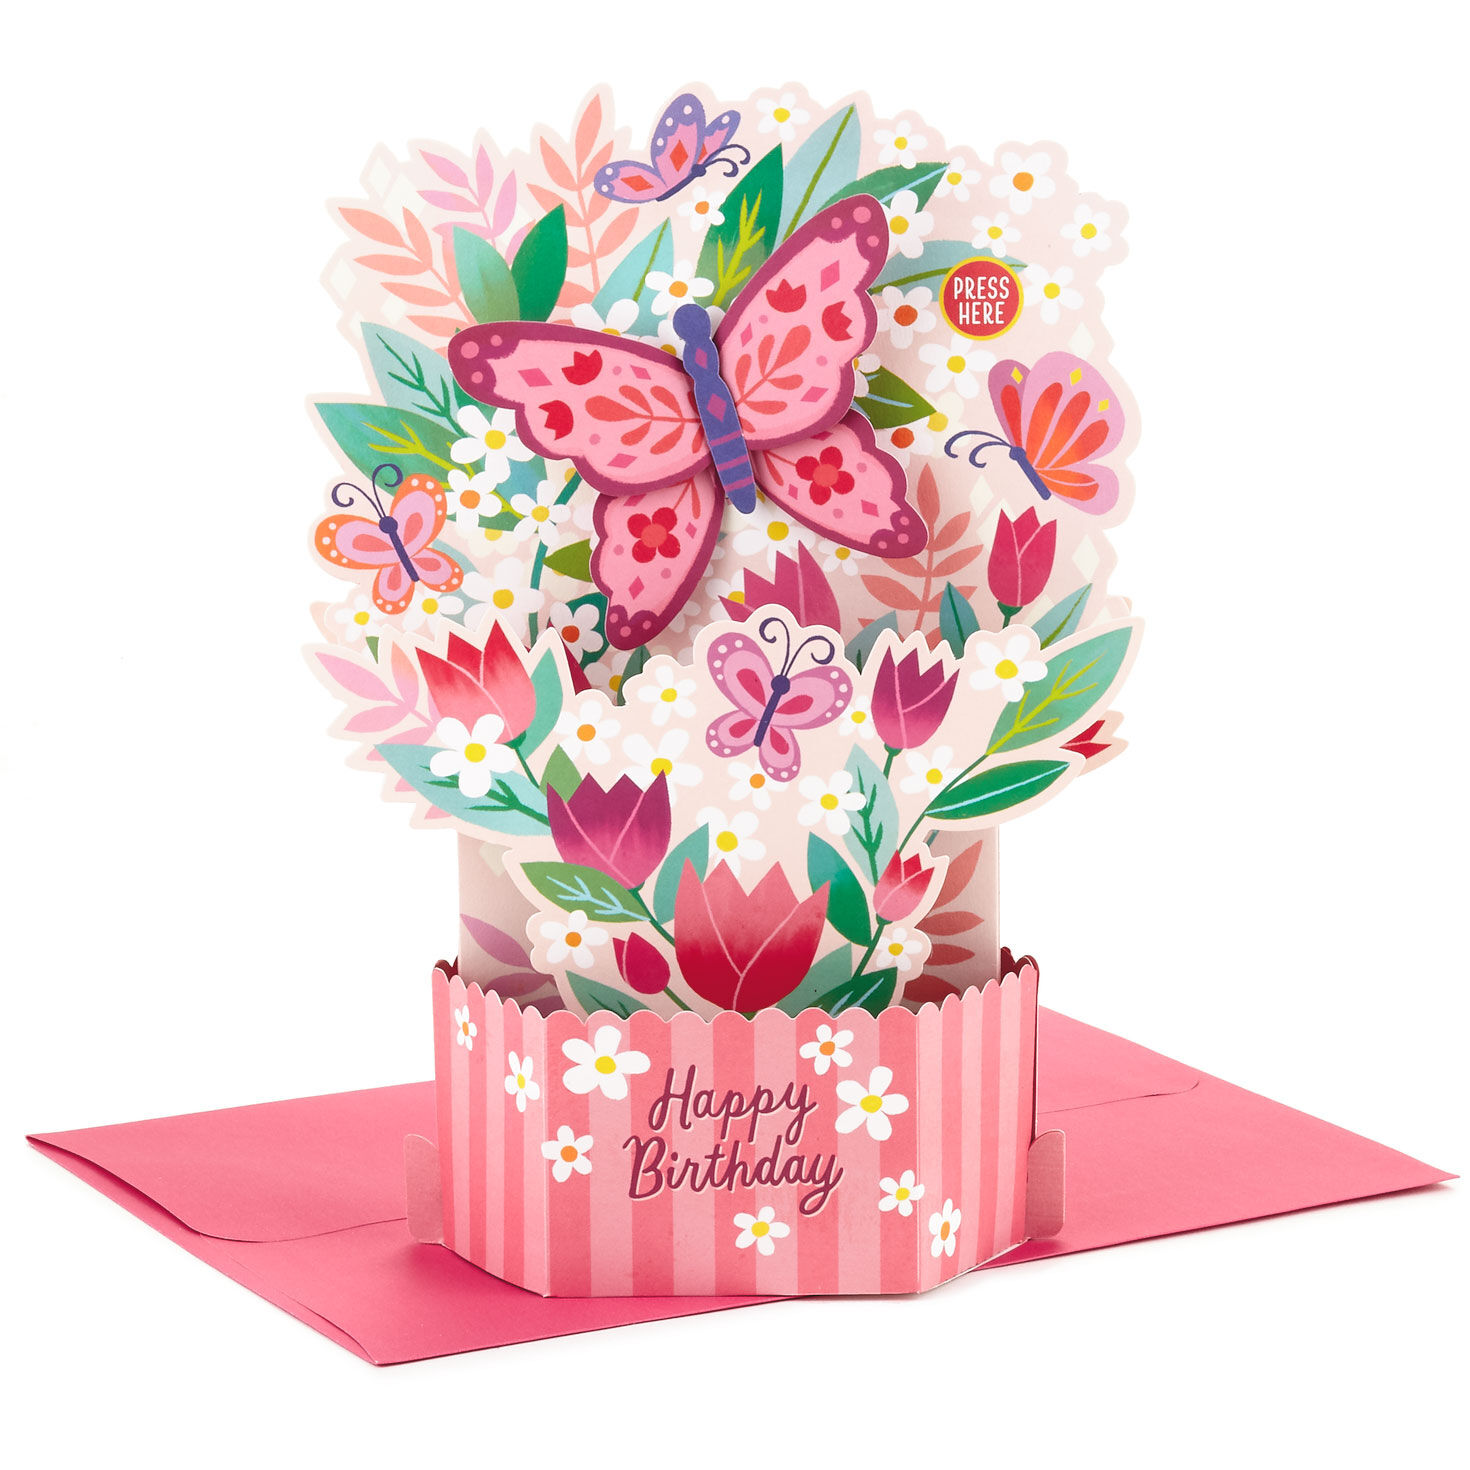 Deluxe 3D Pop-up Swing Greetings Card Butterfly Ladies Girls Mums Birthday Party 